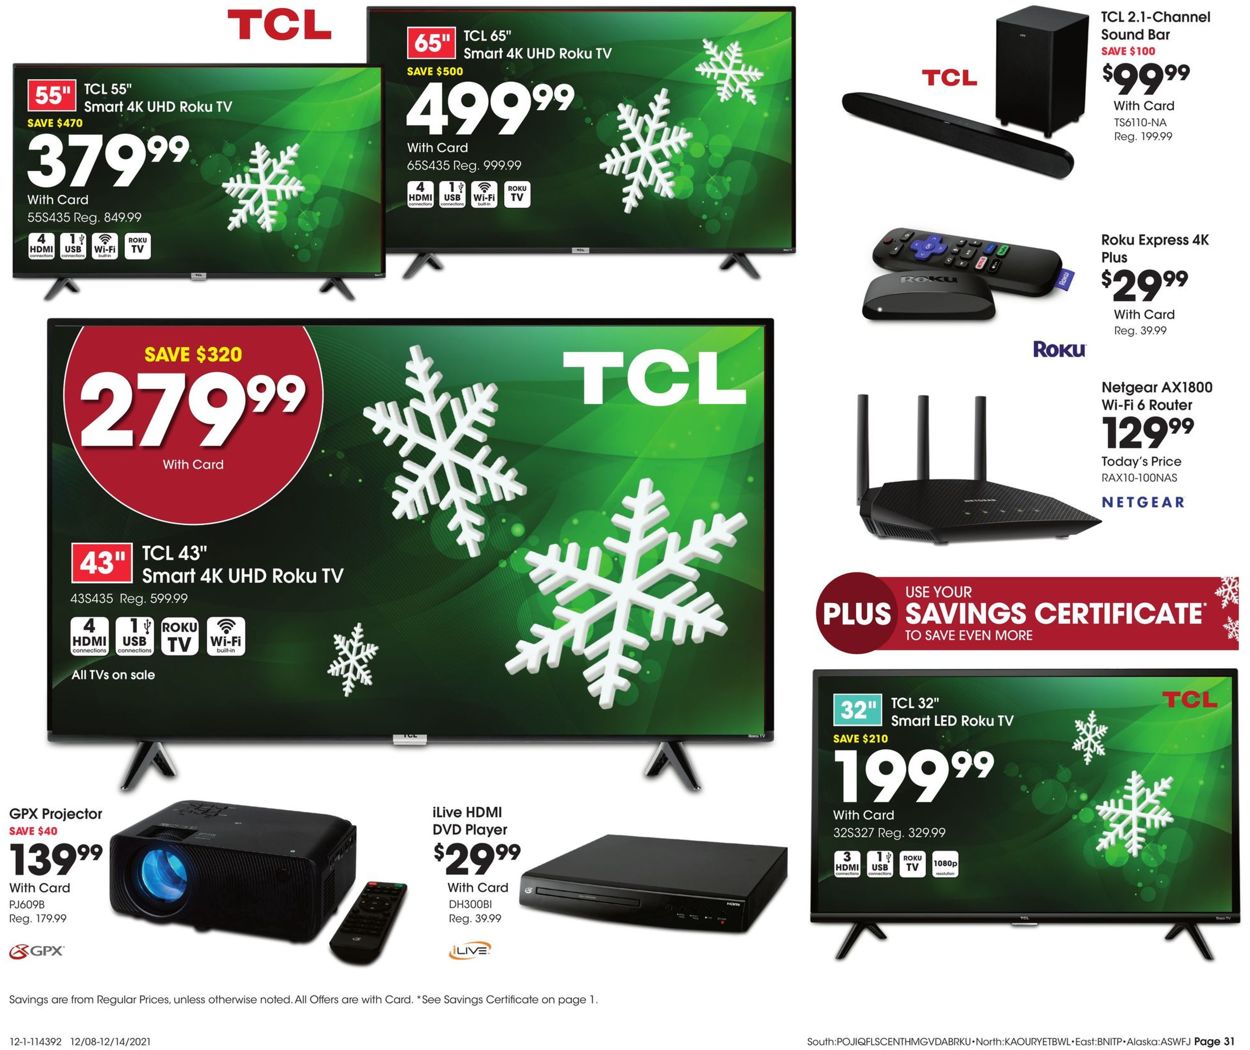 Catalogue Fred Meyer HOLIDAY 2021 from 12/08/2021